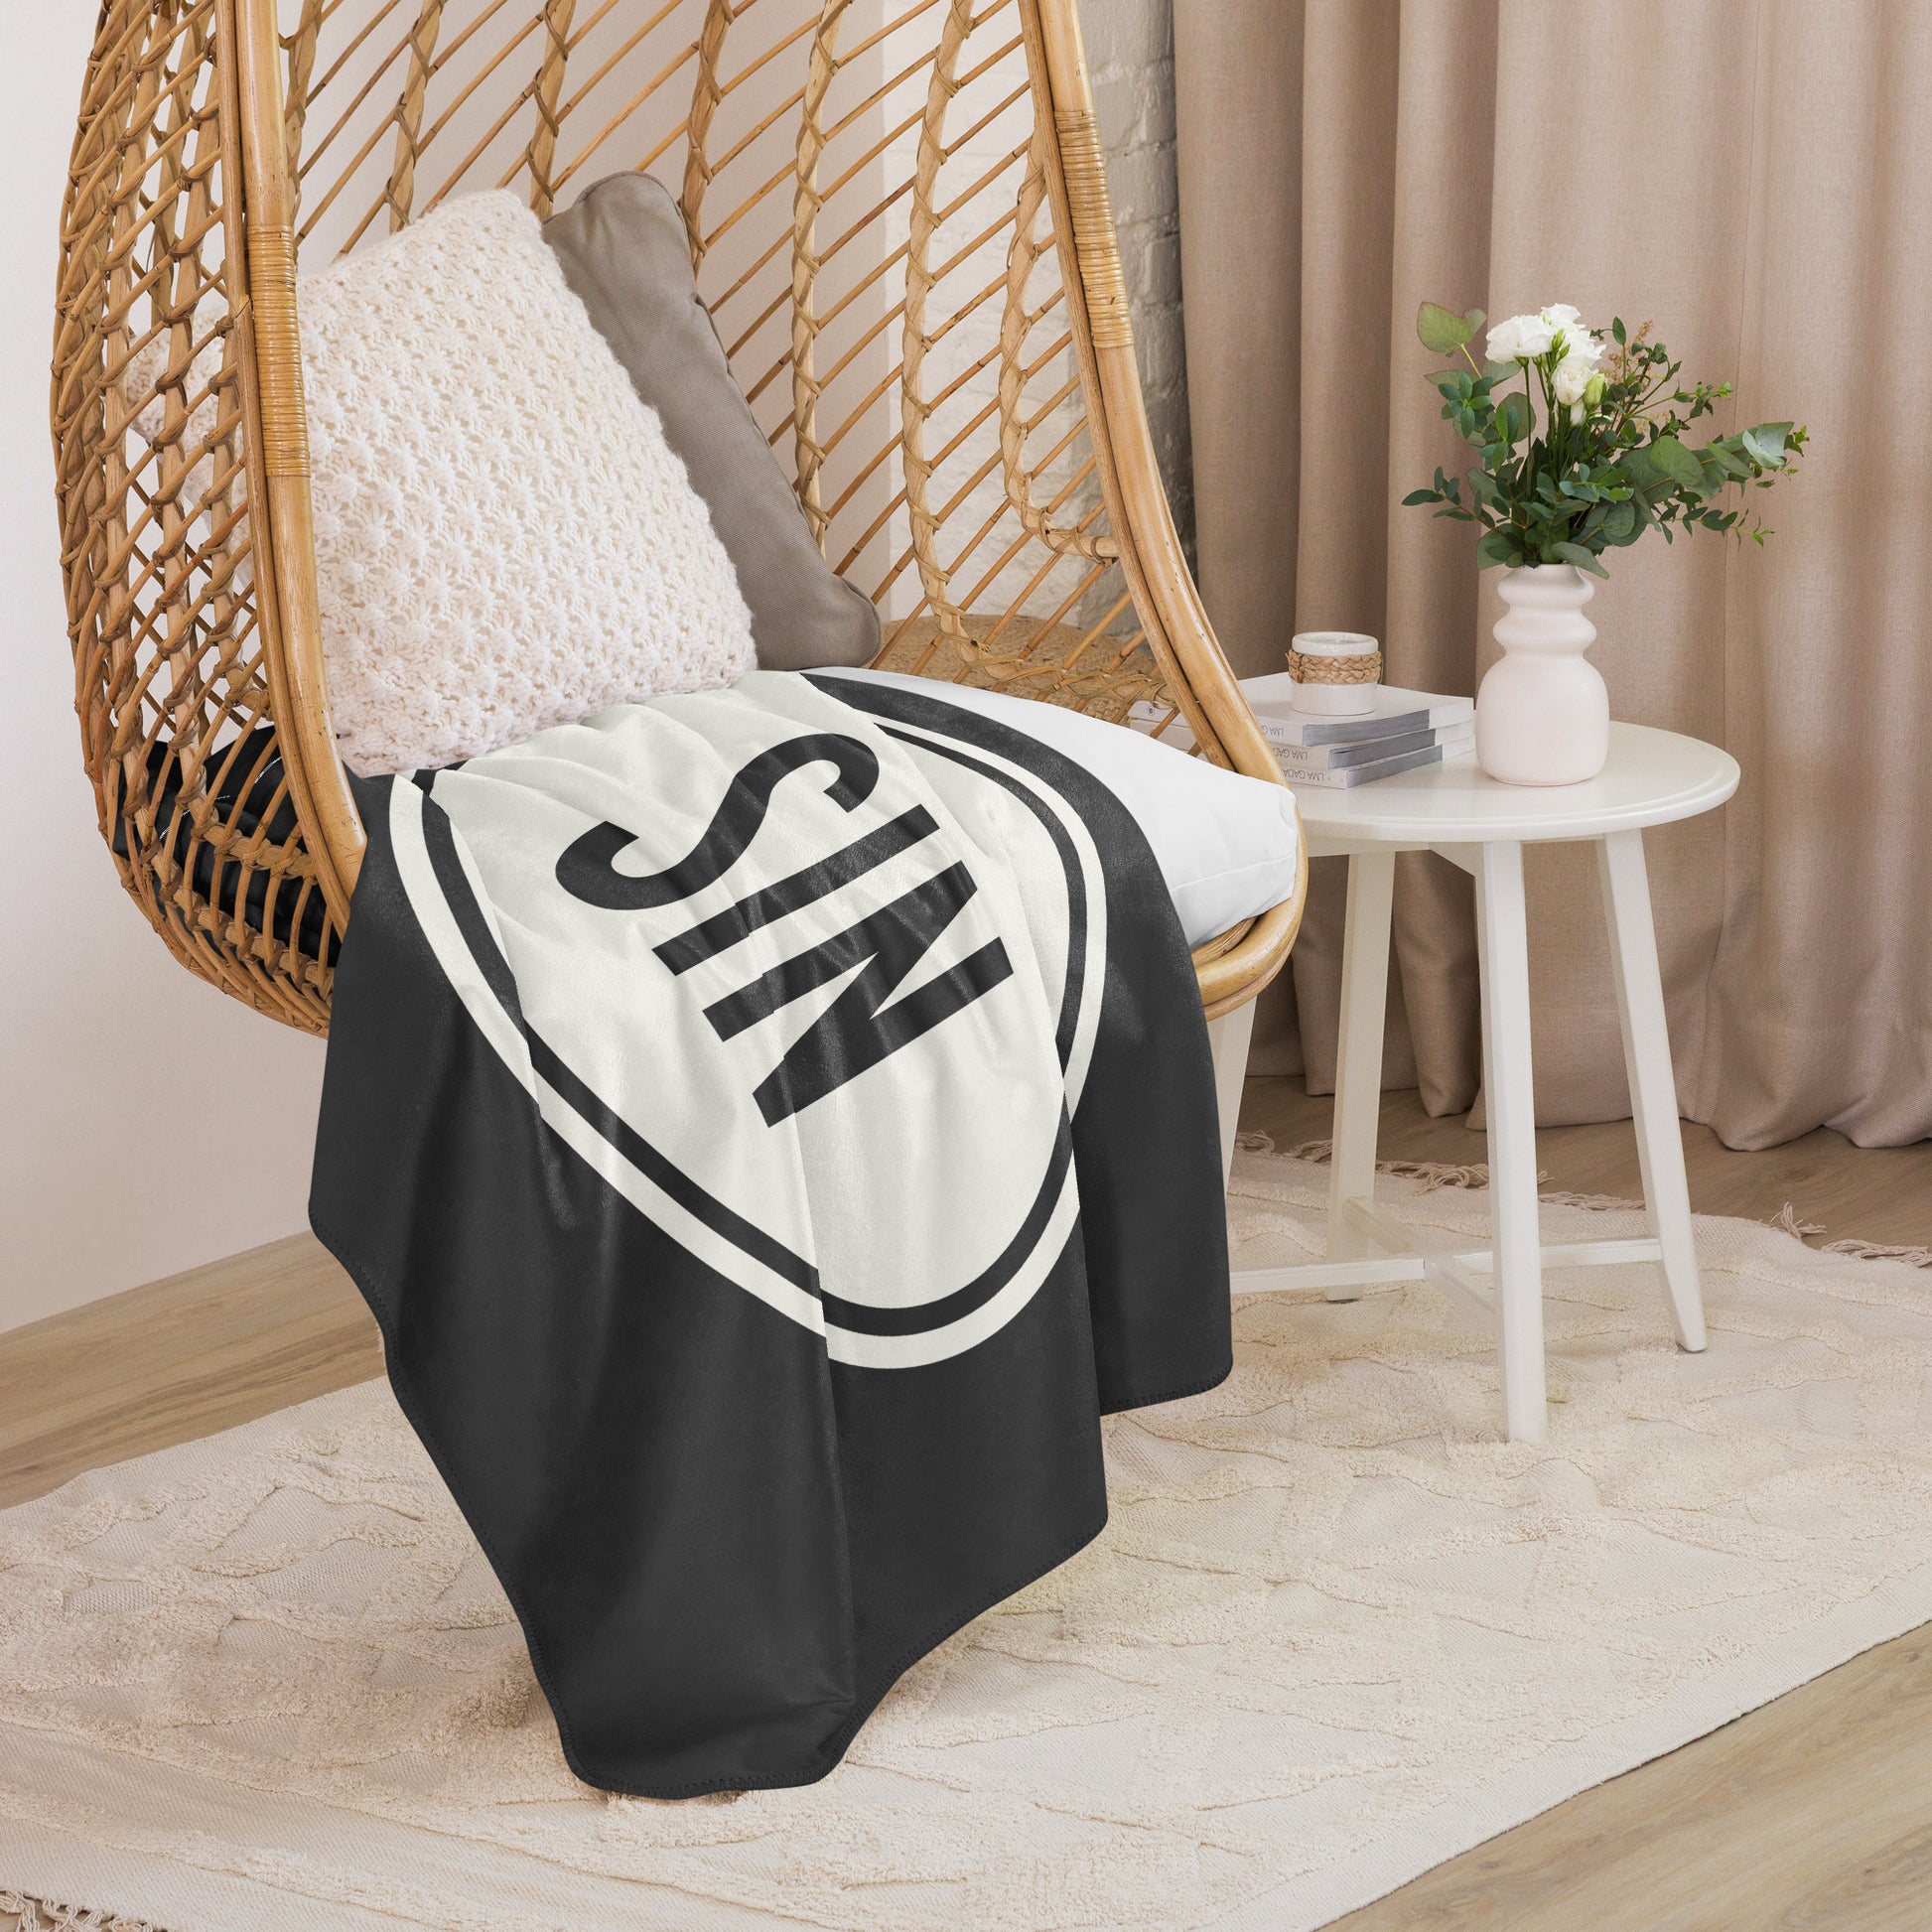 Unique Travel Gift Sherpa Blanket - White Oval • SIN Singapore • YHM Designs - Image 06